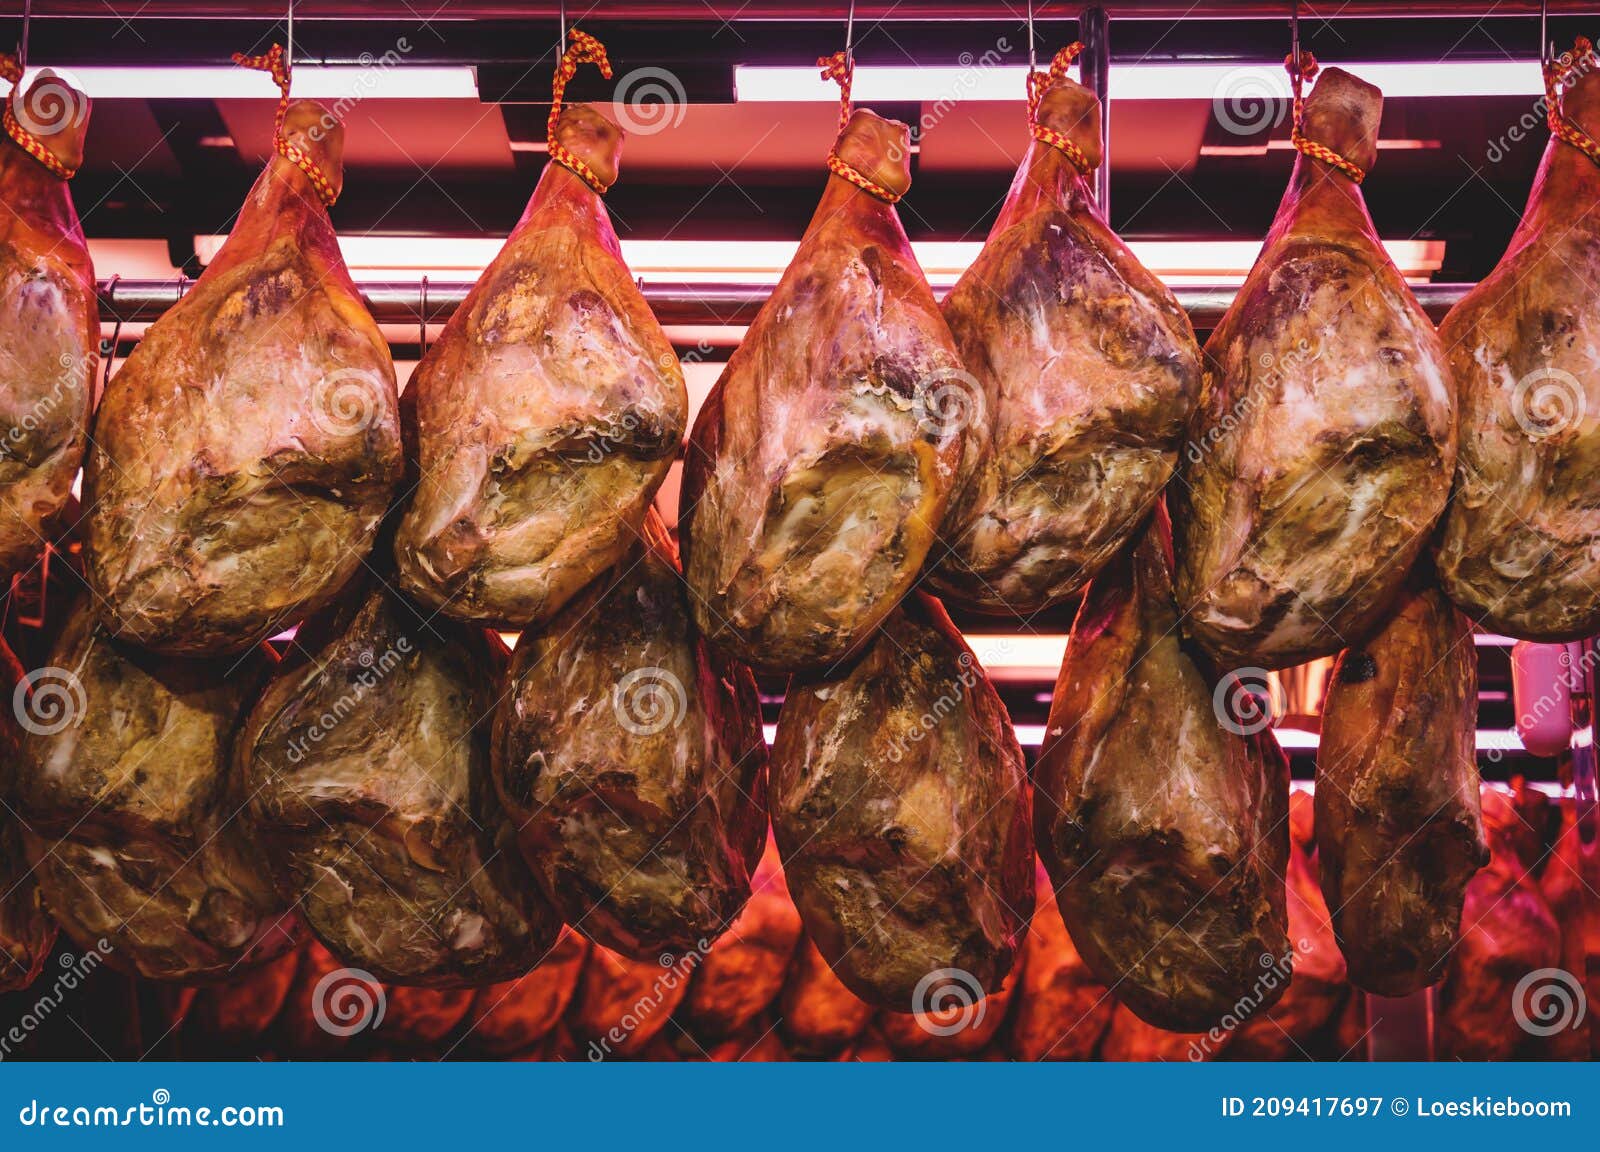 Detail of Spanish Ham Serrano` Hanging at a Stand in the Market `Mercat Central` Valencia, Spain Stock Image - Image of iberico, serrano: 209417697